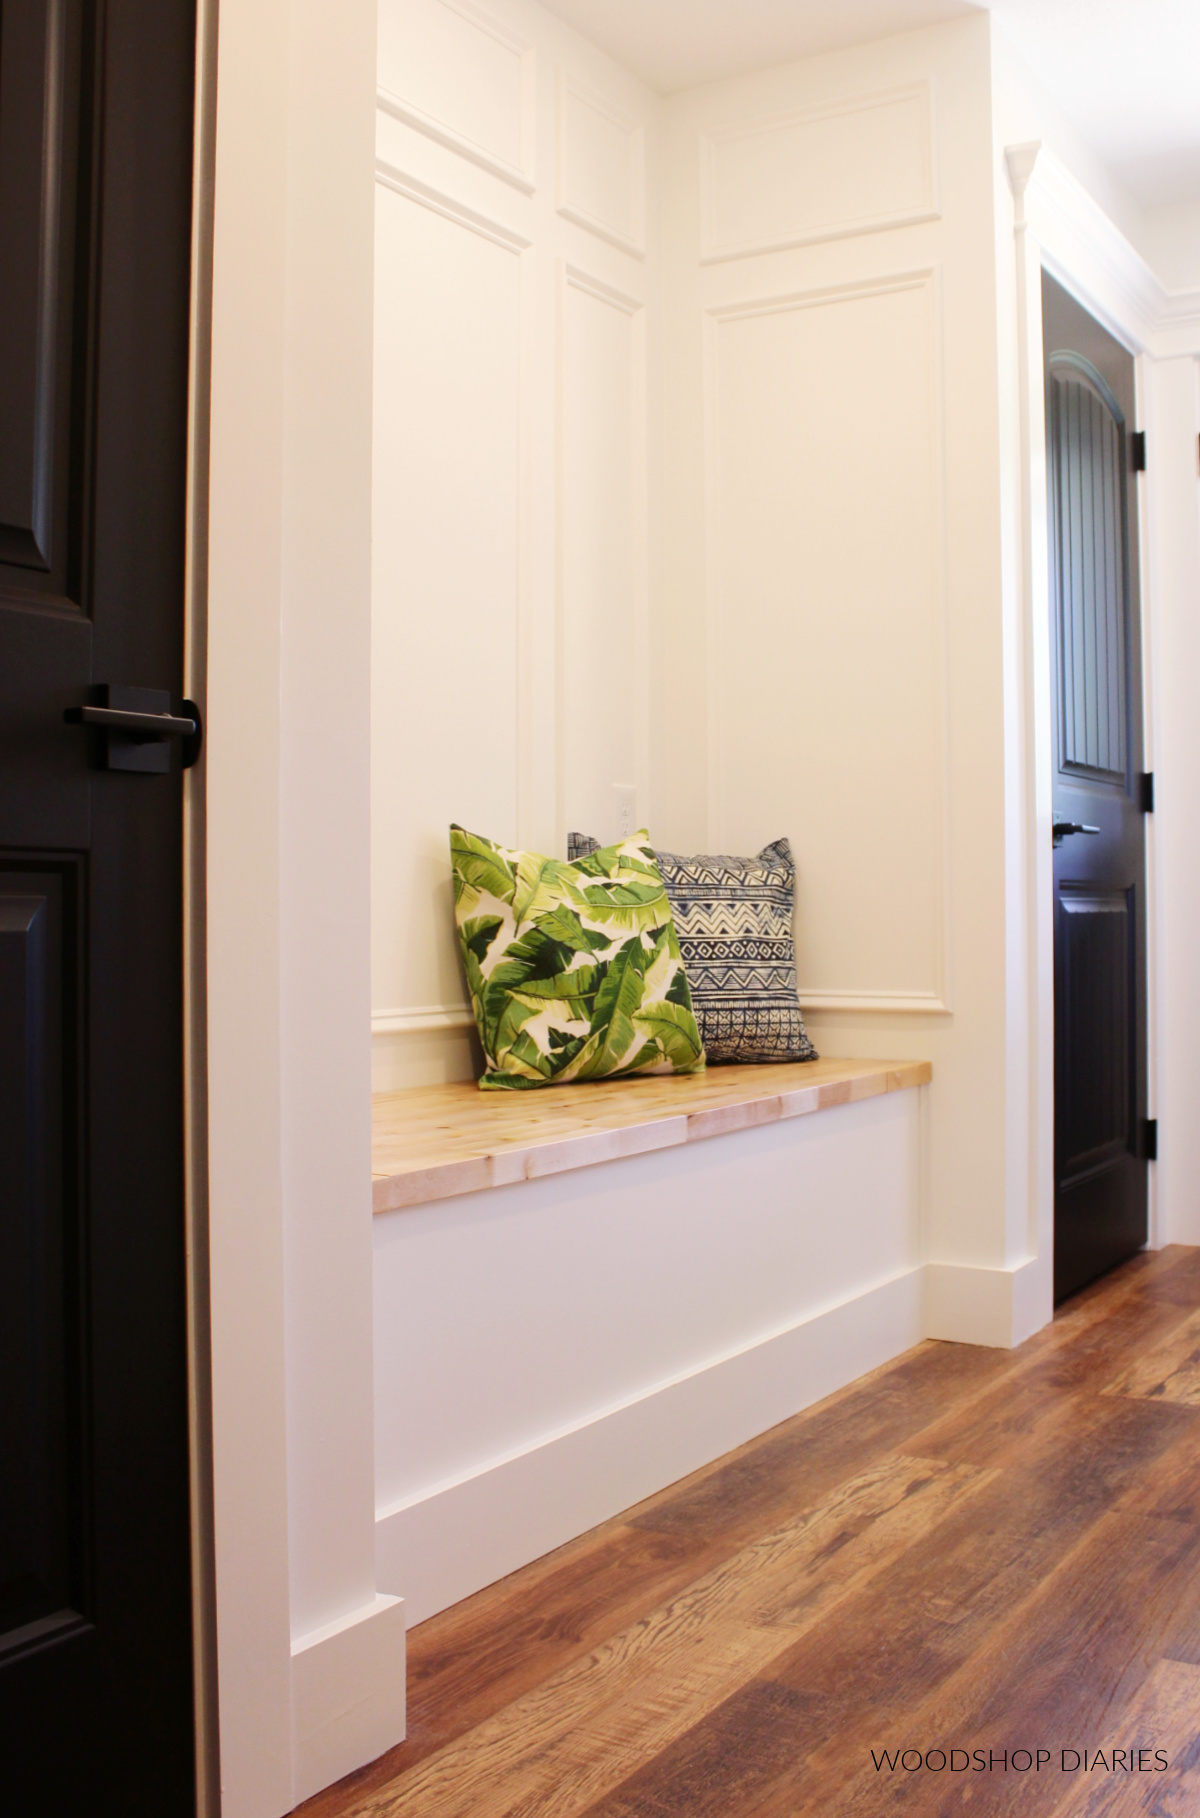 White wall with picture frame molding accent trim and black doors around built in bench